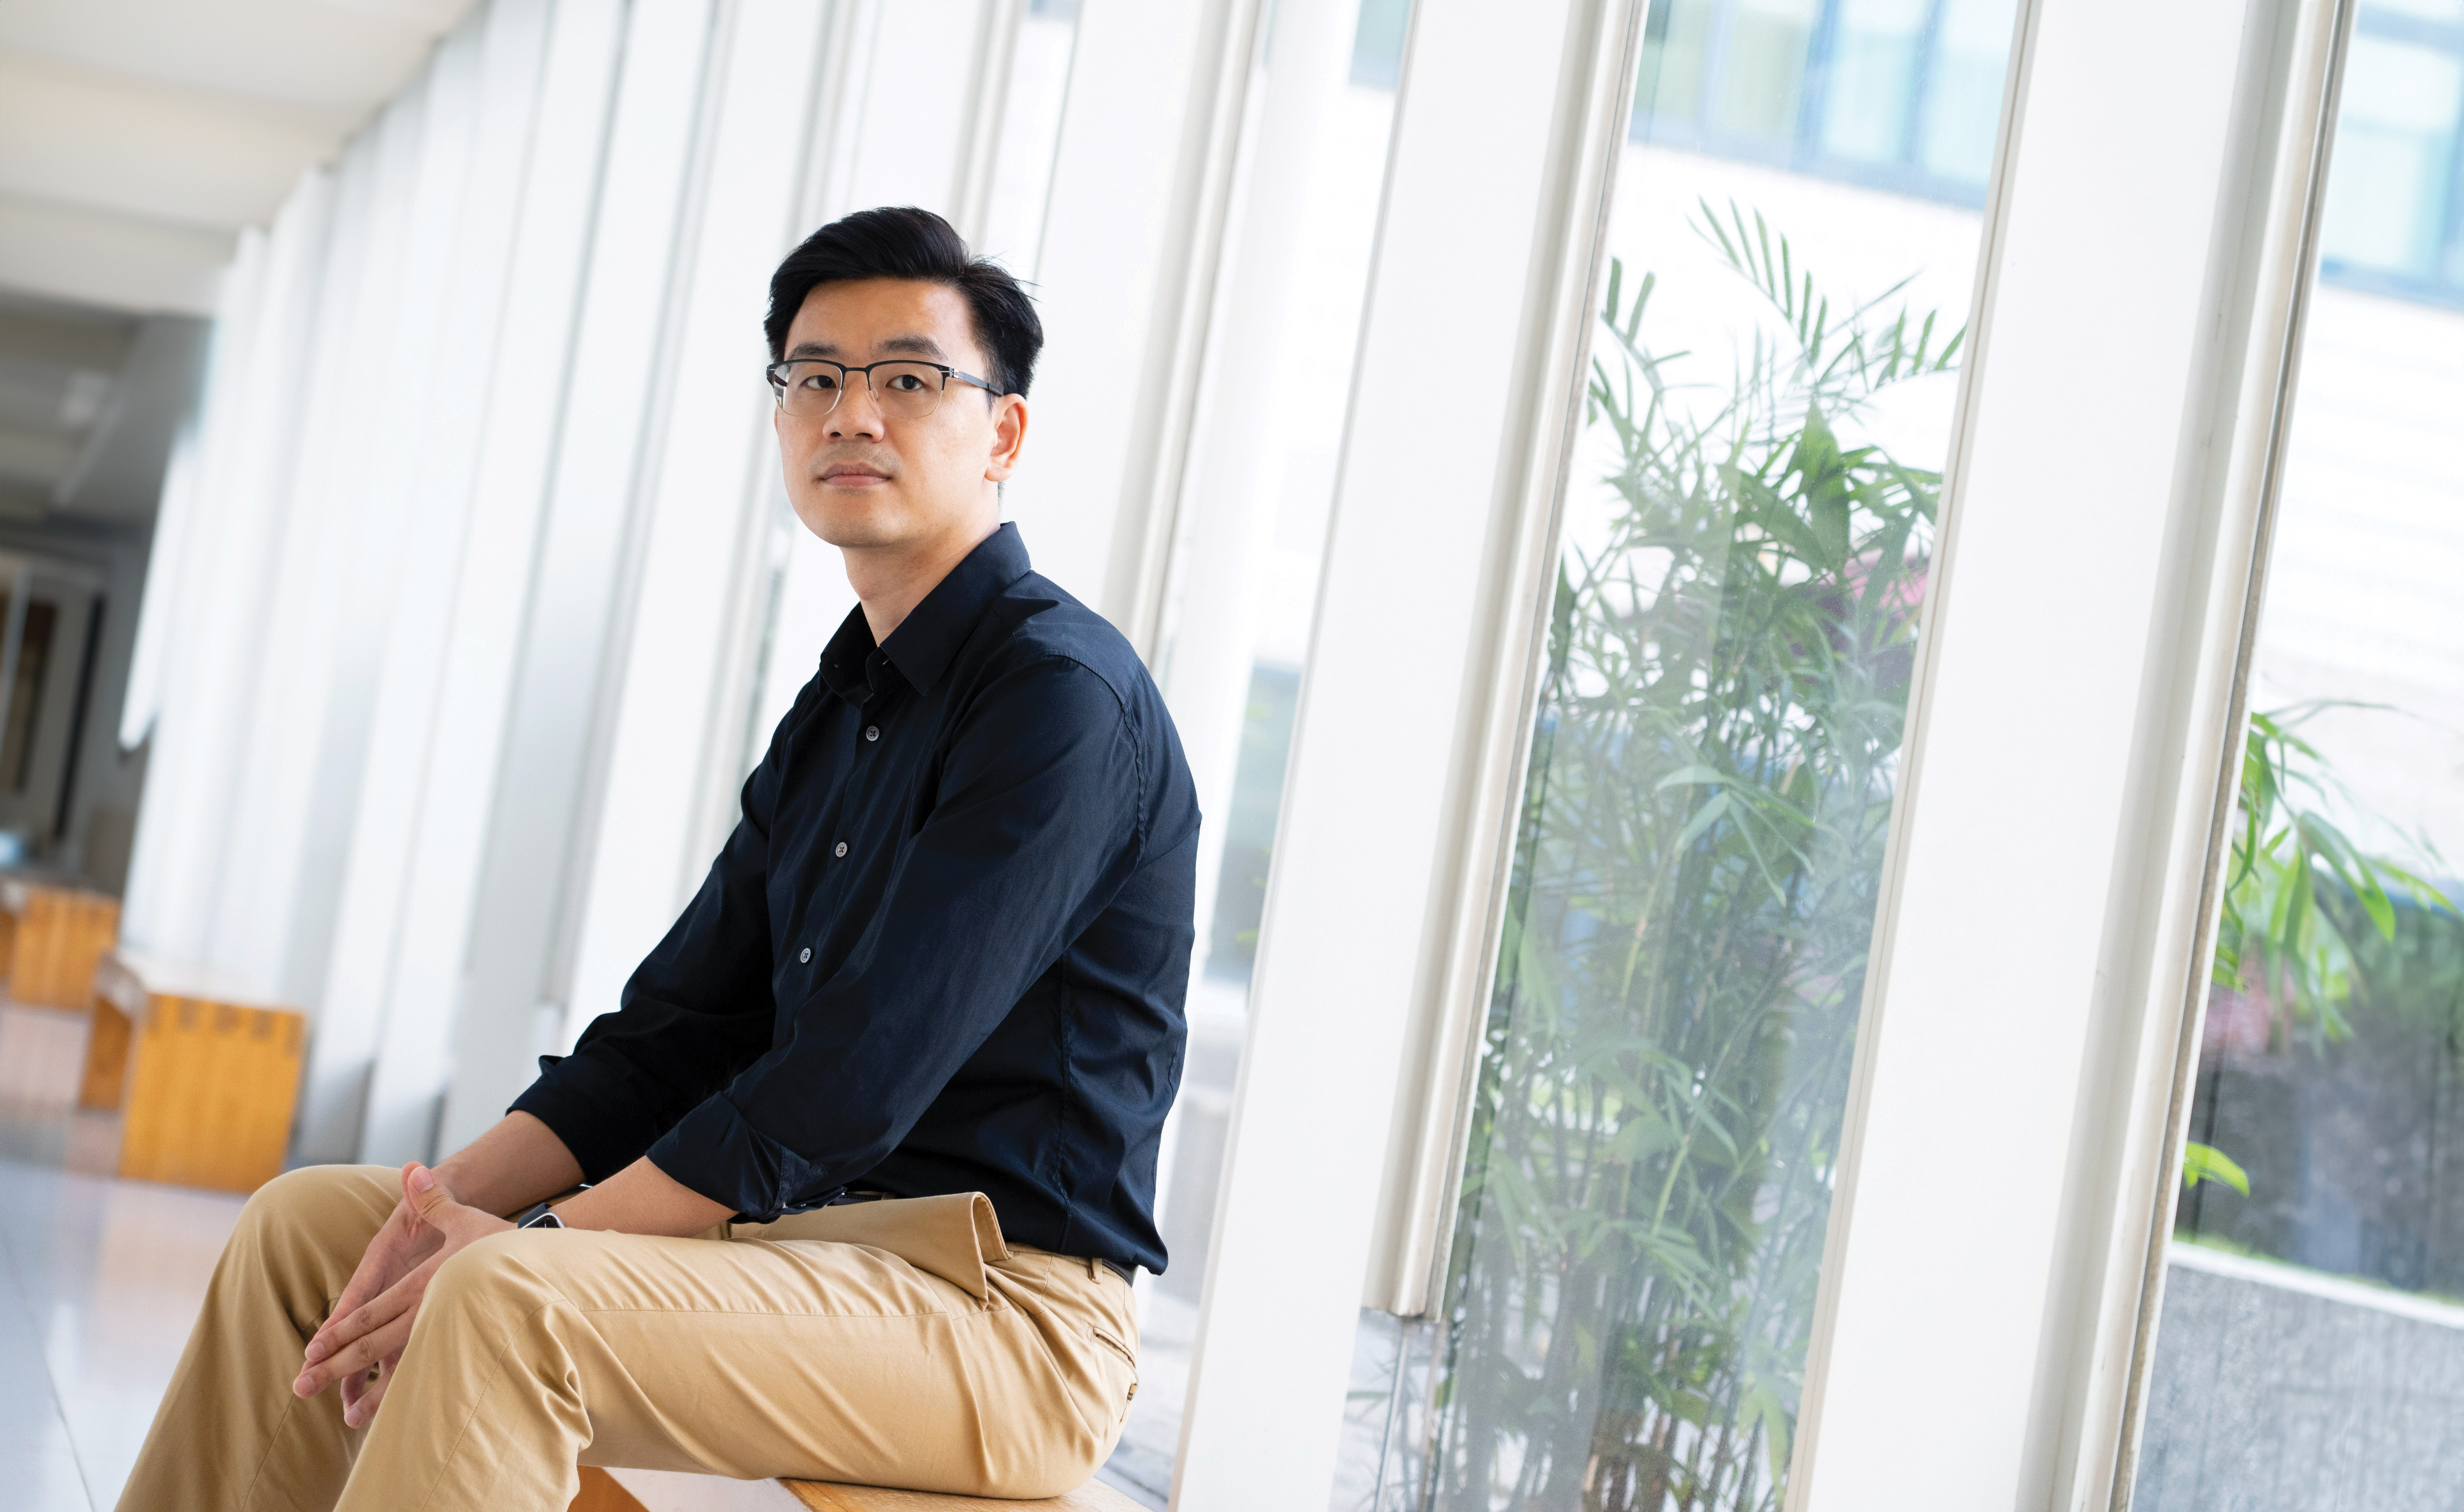 Seeing his research have a social impact is one of the most rewarding aspects of work for Wang.